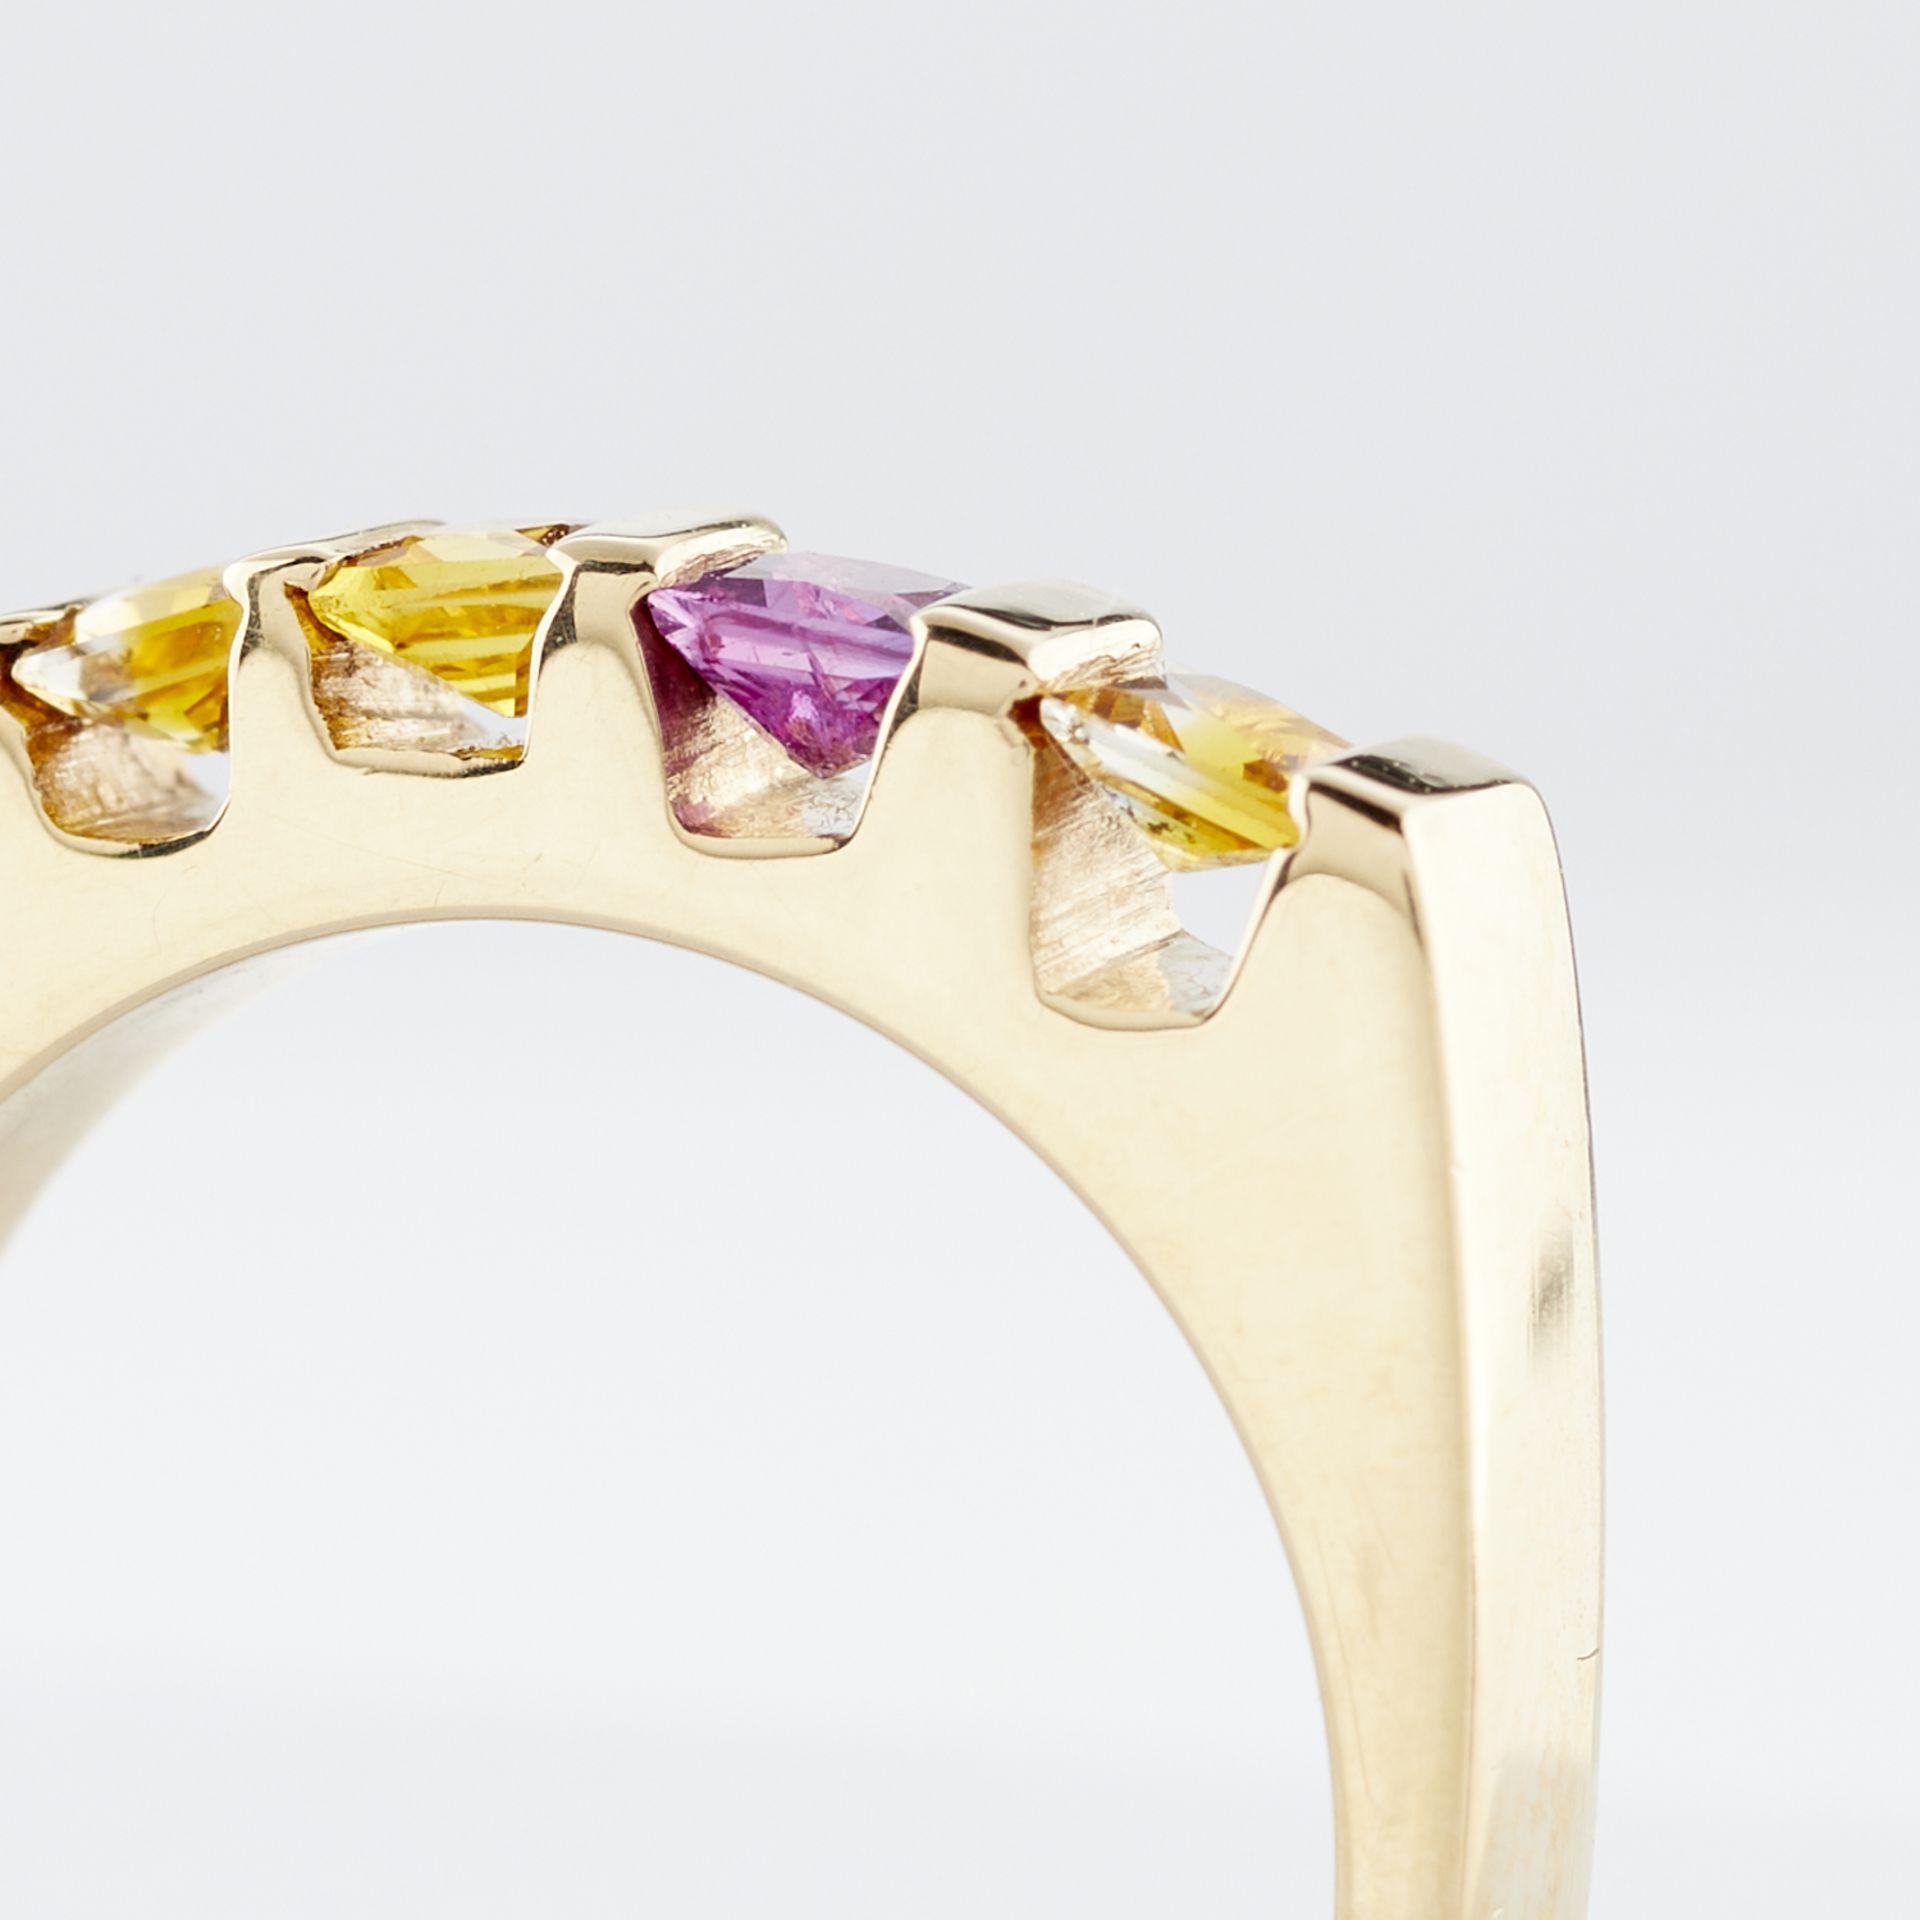 14k Yellow Gold & Sapphire Ring - Image 4 of 11